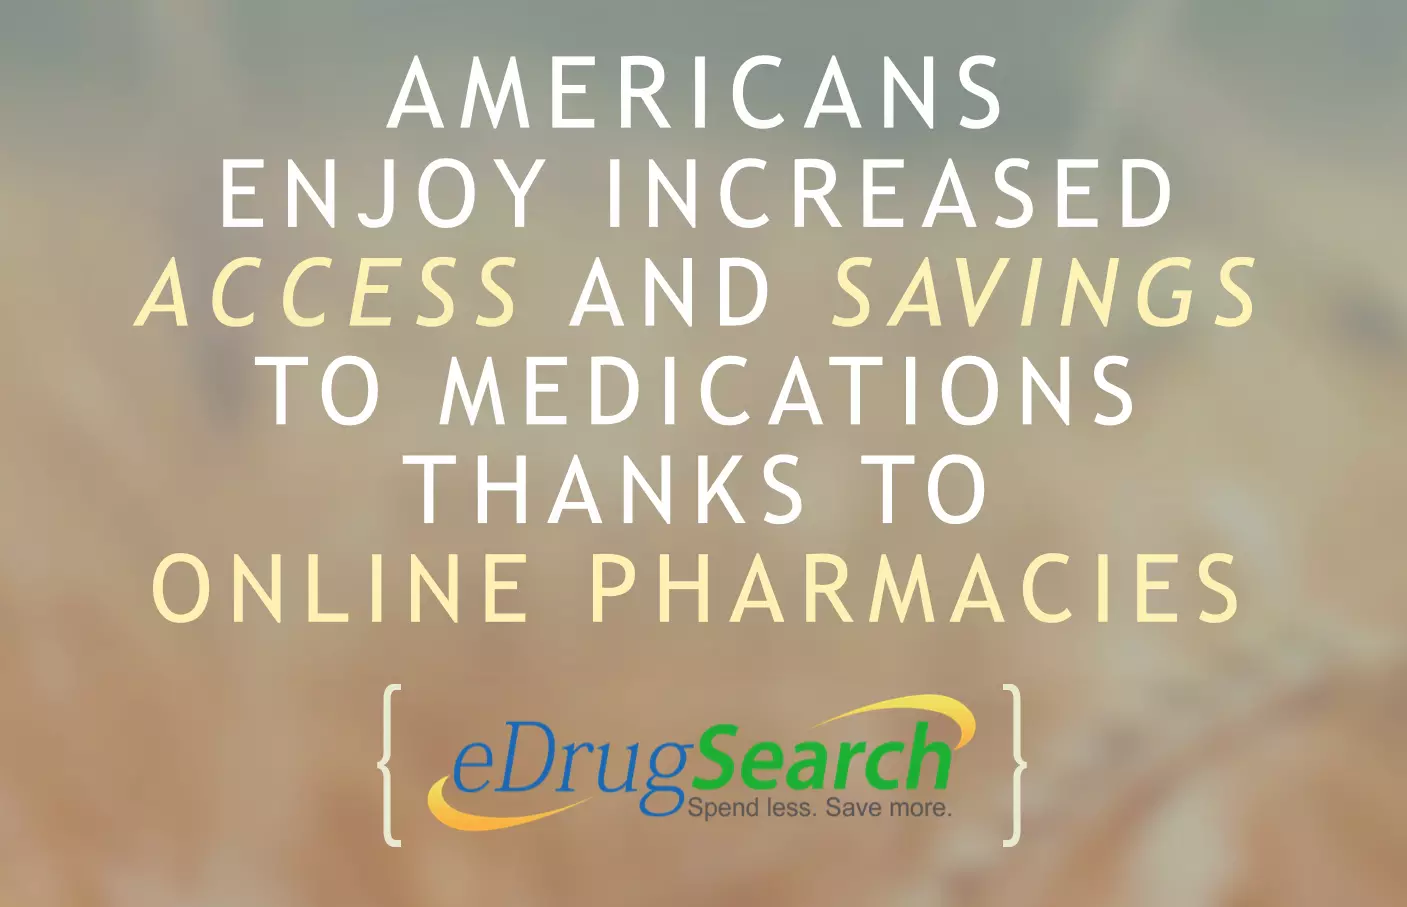 Americans Enjoy Increased Access and Savings to Medications Thanks to Online Pharmacies!